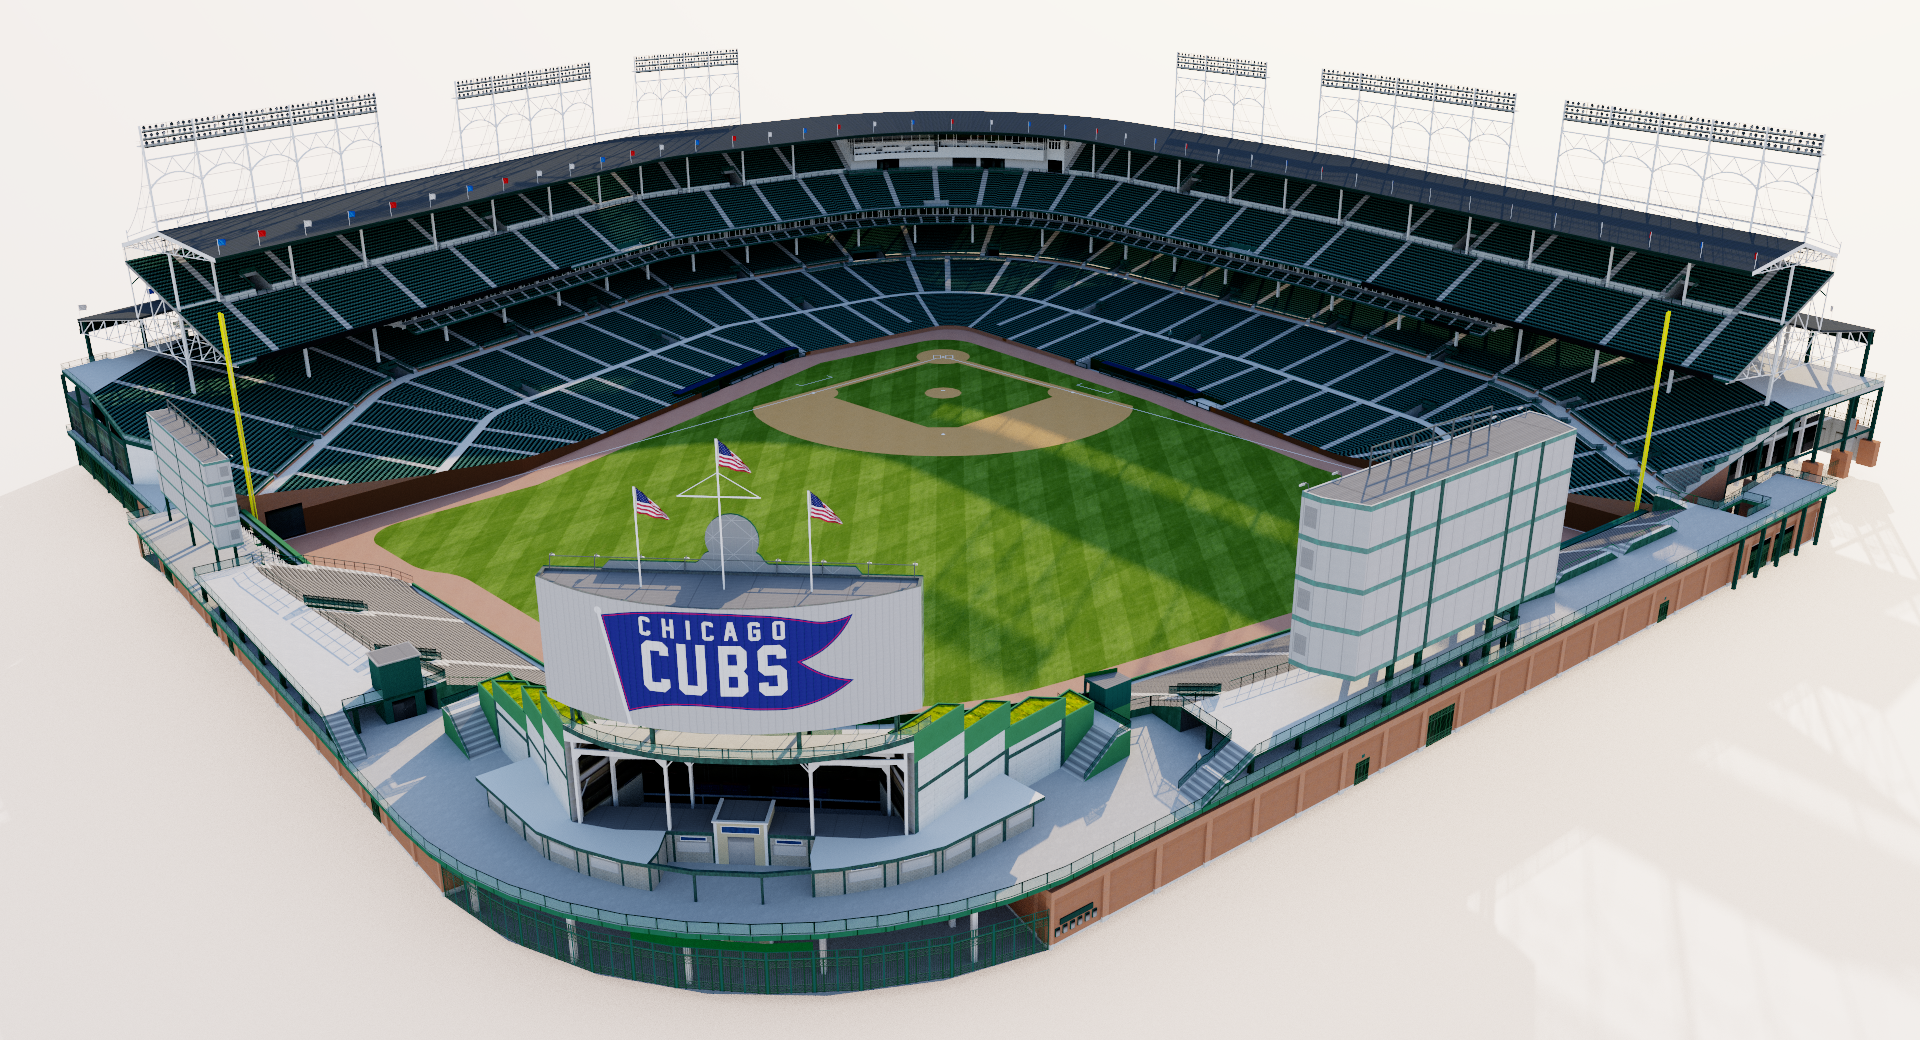 Chicago Cubs Store, Wrigley Field, Chicago, Illinois